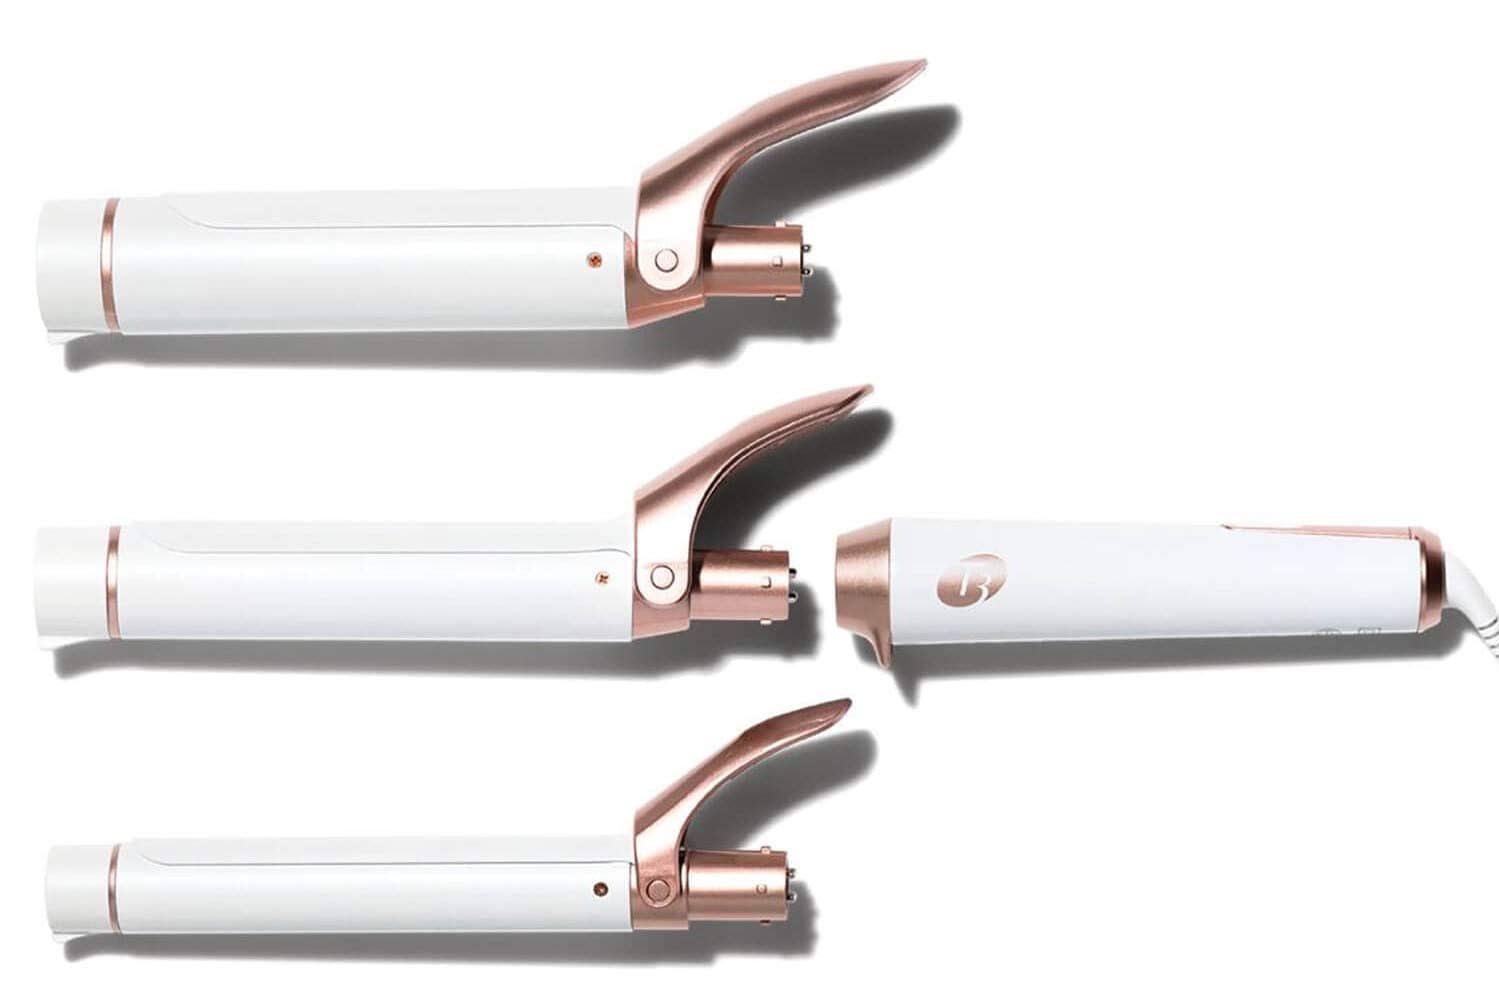 T3 Interchangeable Custom Blend Ceramic Three Barrel Professional Curling Iron Set for Endless Styling Possibilities